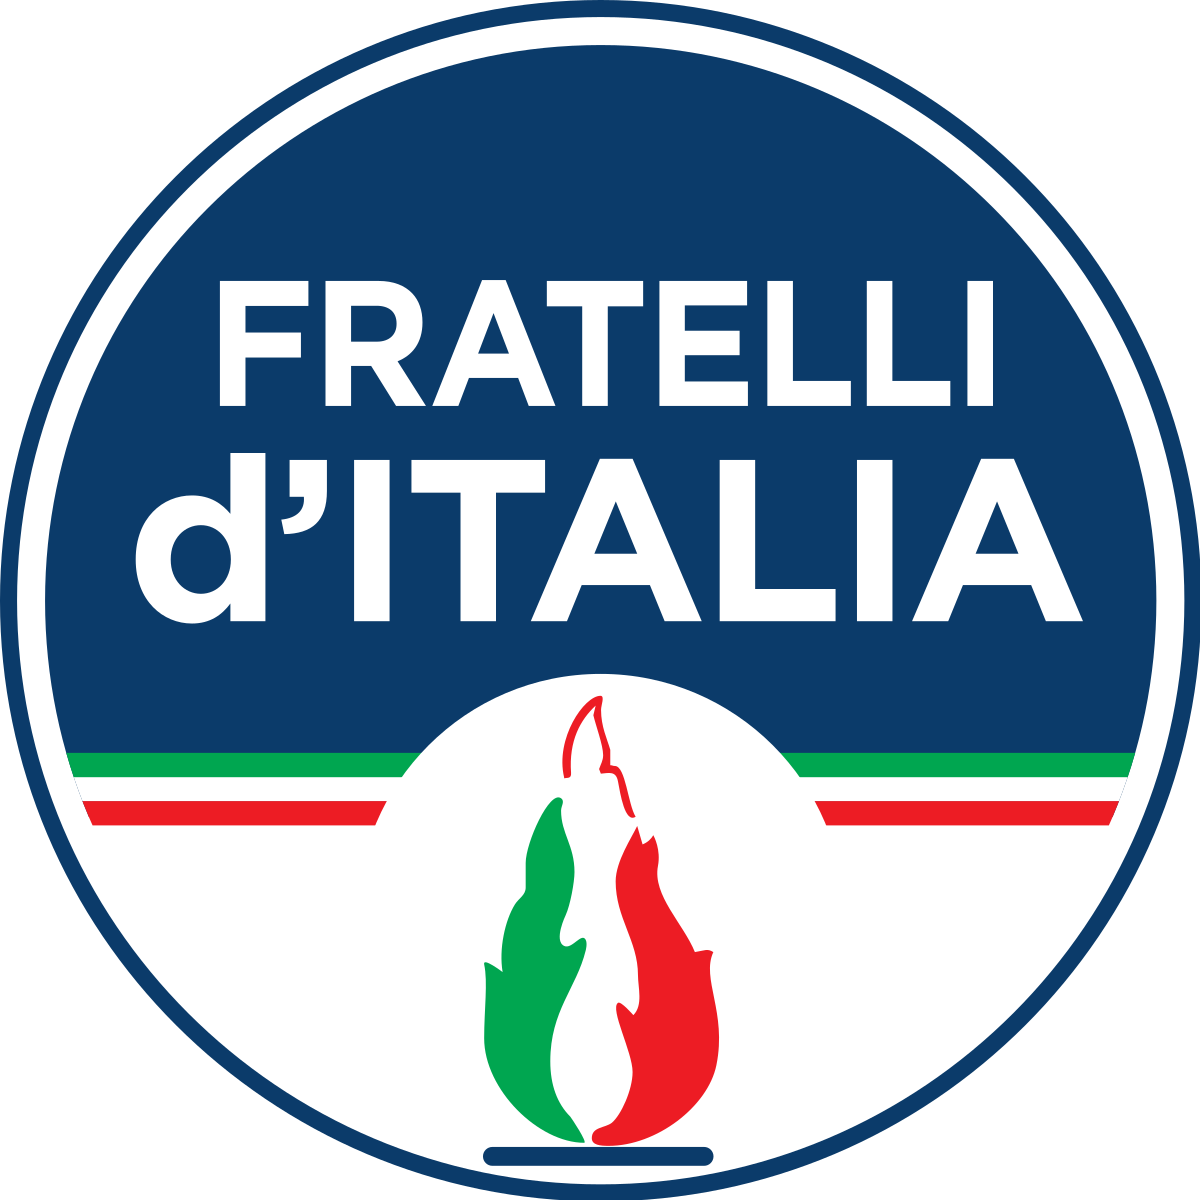 logo of the national conservative party Fratelli d'Italia (Brothers of Italy).